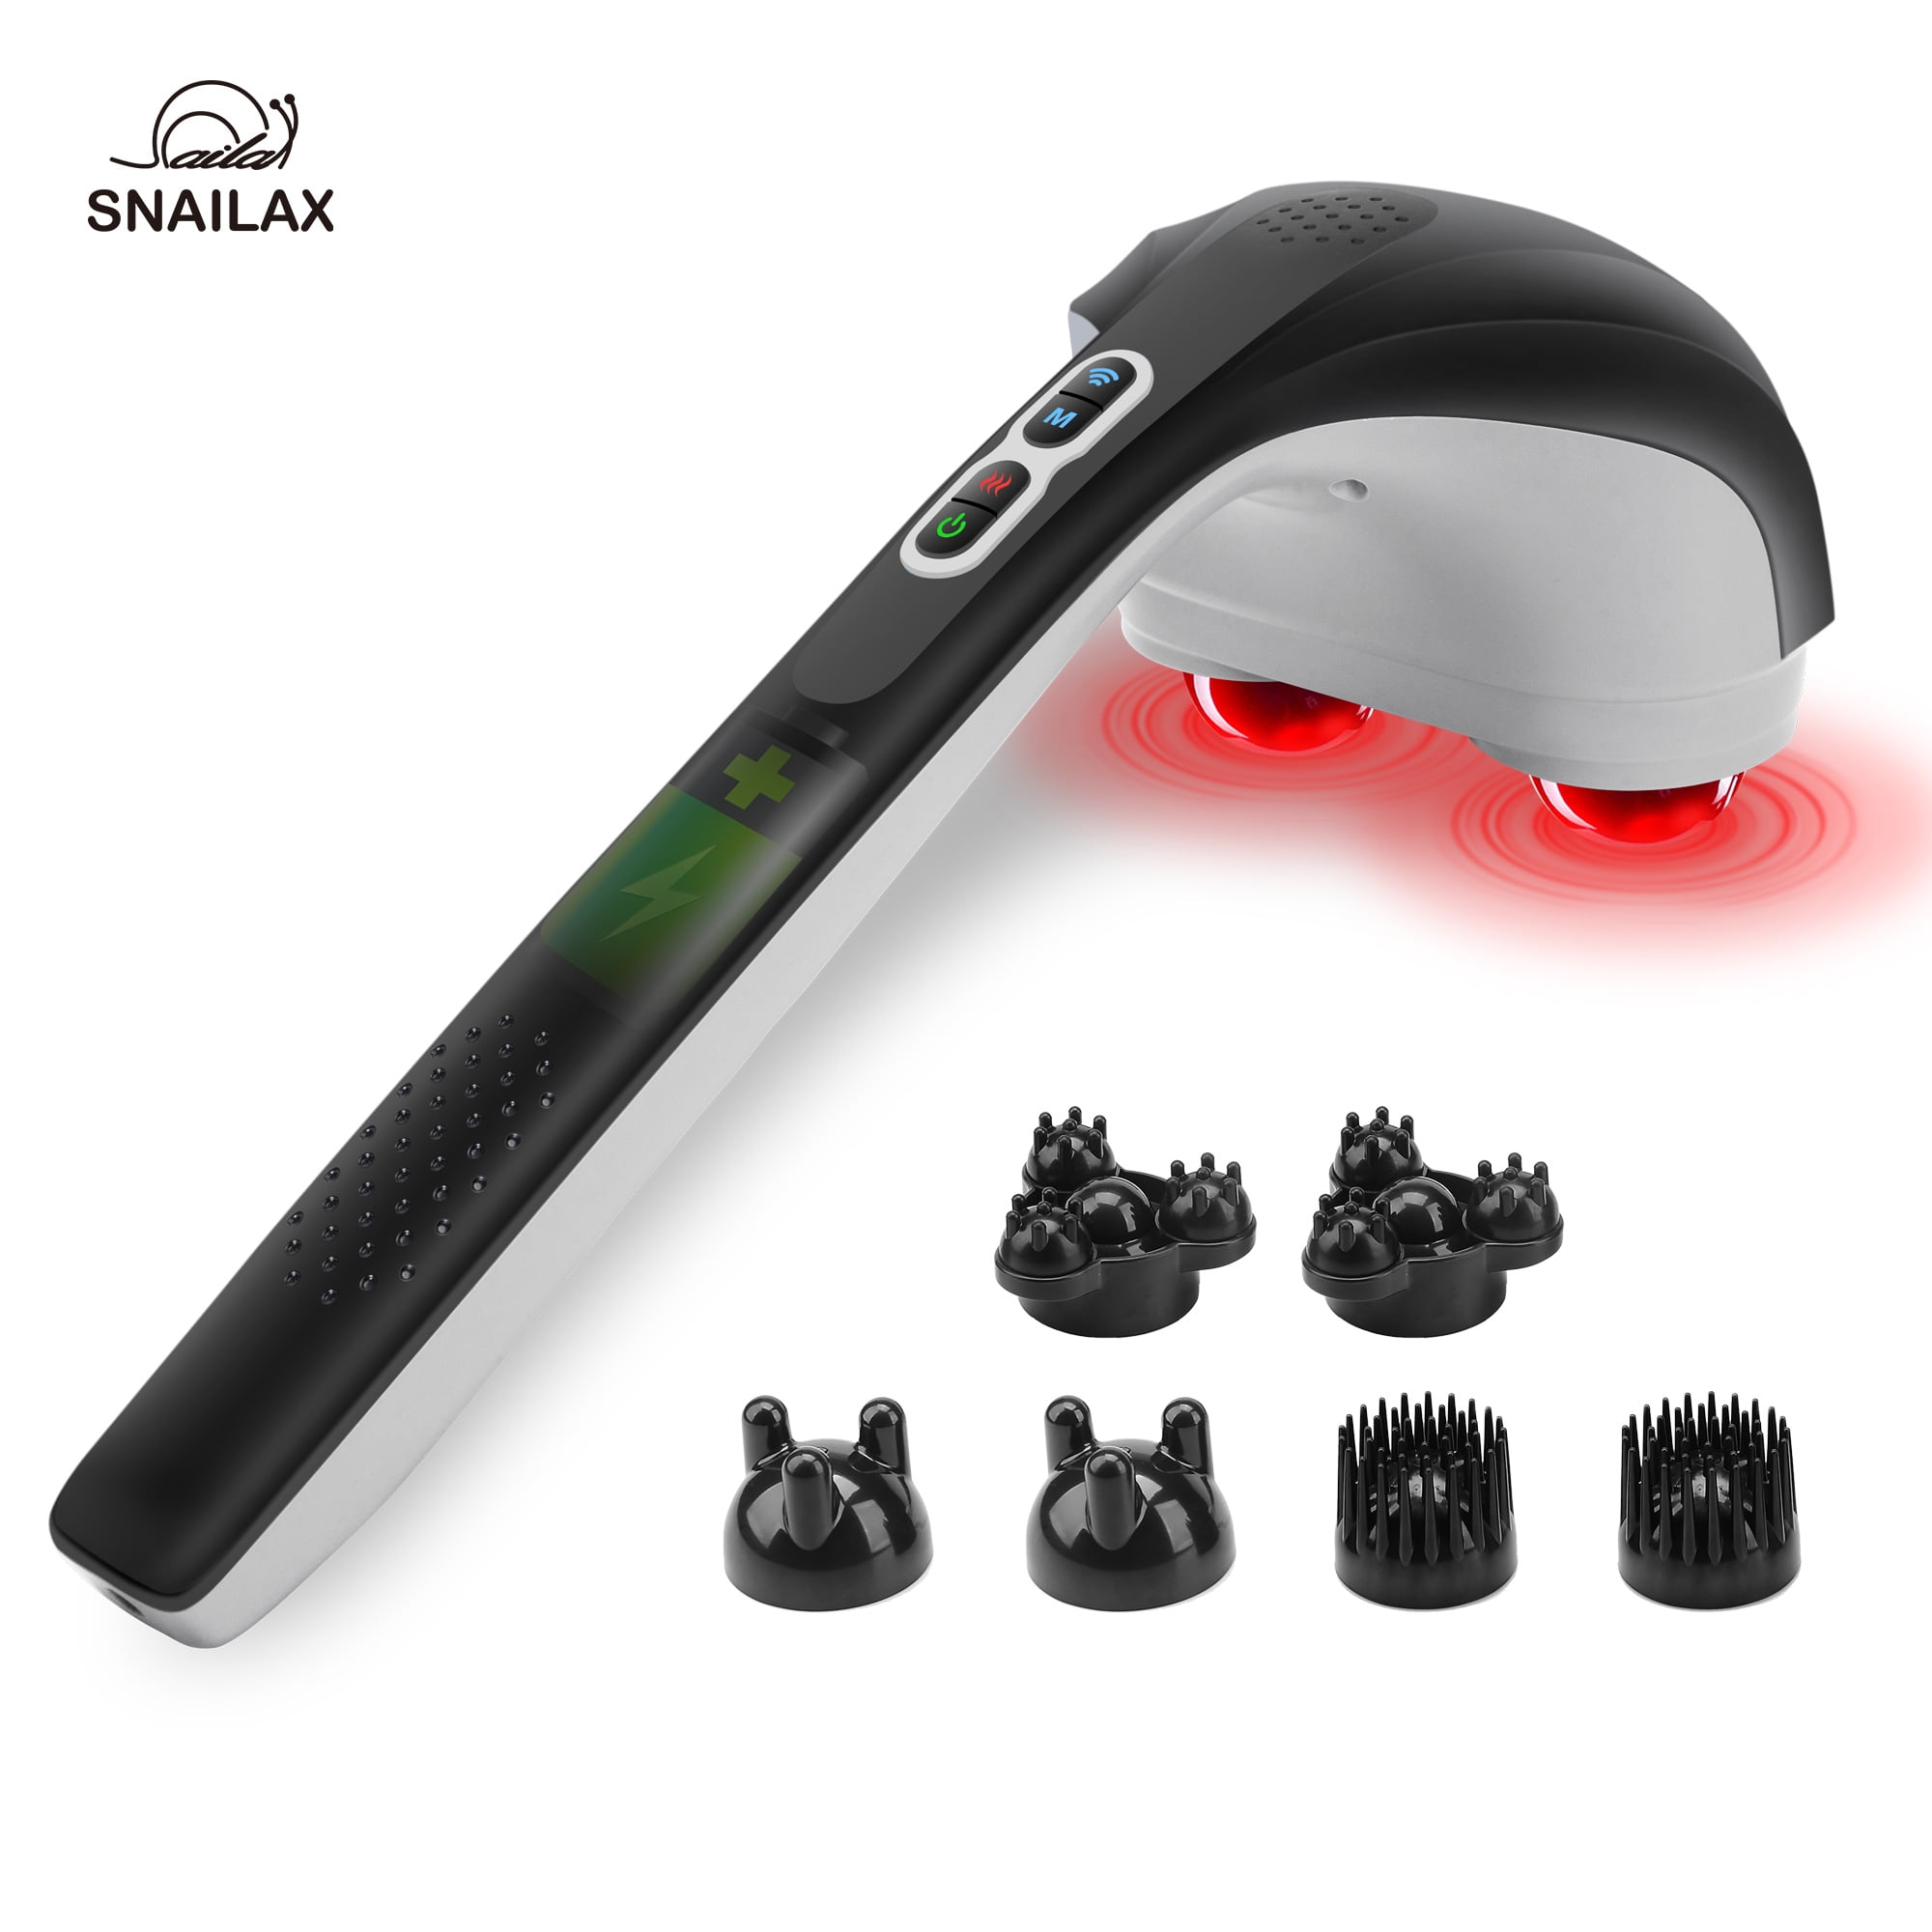 Snailax Handheld Massager with Heat, Cordless Deep Tissue Back&Neck Massager, Christmas Gift for Family, Size: One size, 6 Heads